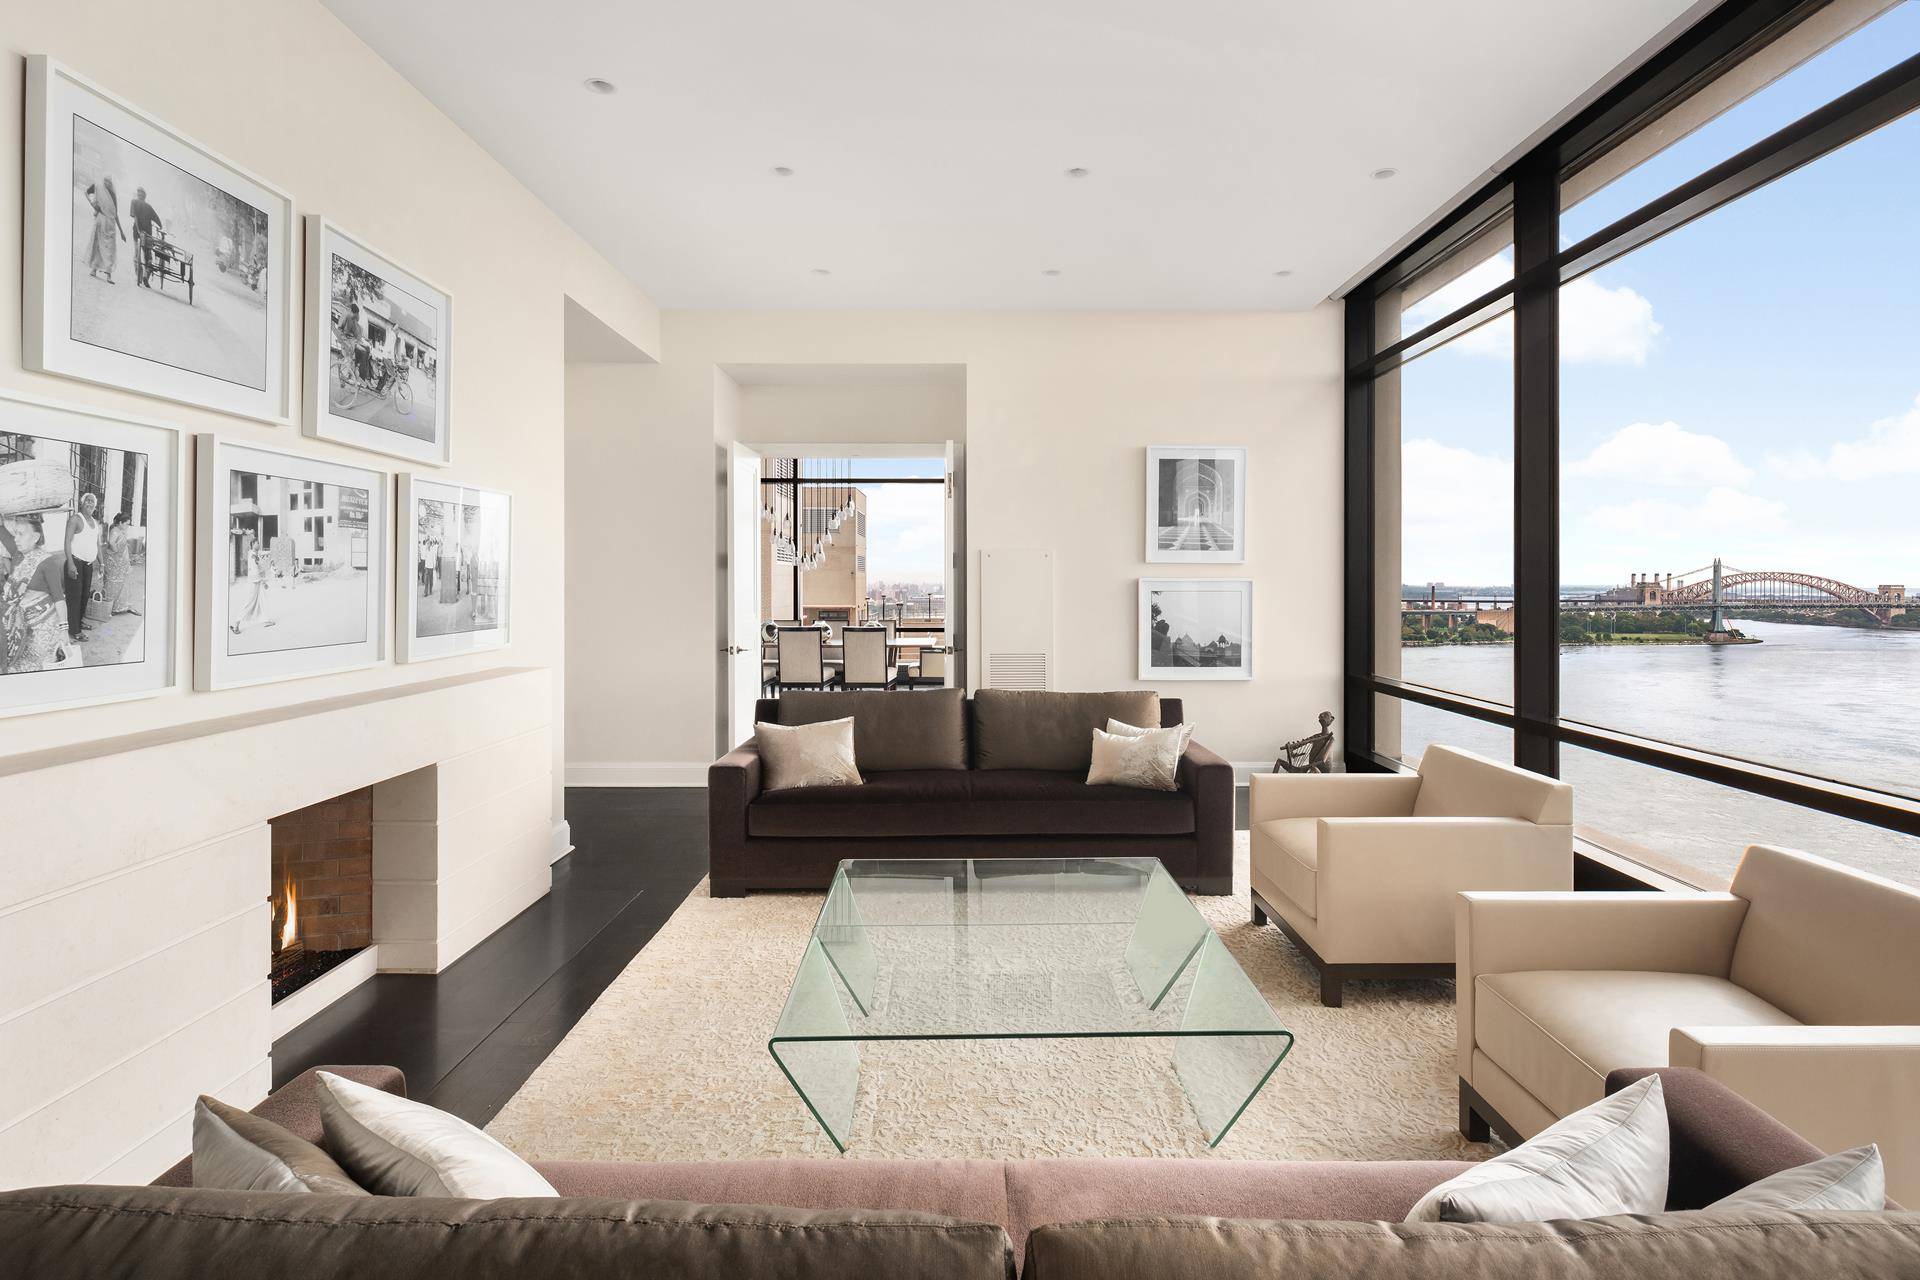 Embrace the sheer bliss of splendid living in this superb, top floor Penthouse in one of Manhattan's most sought after residential neighborhoods.